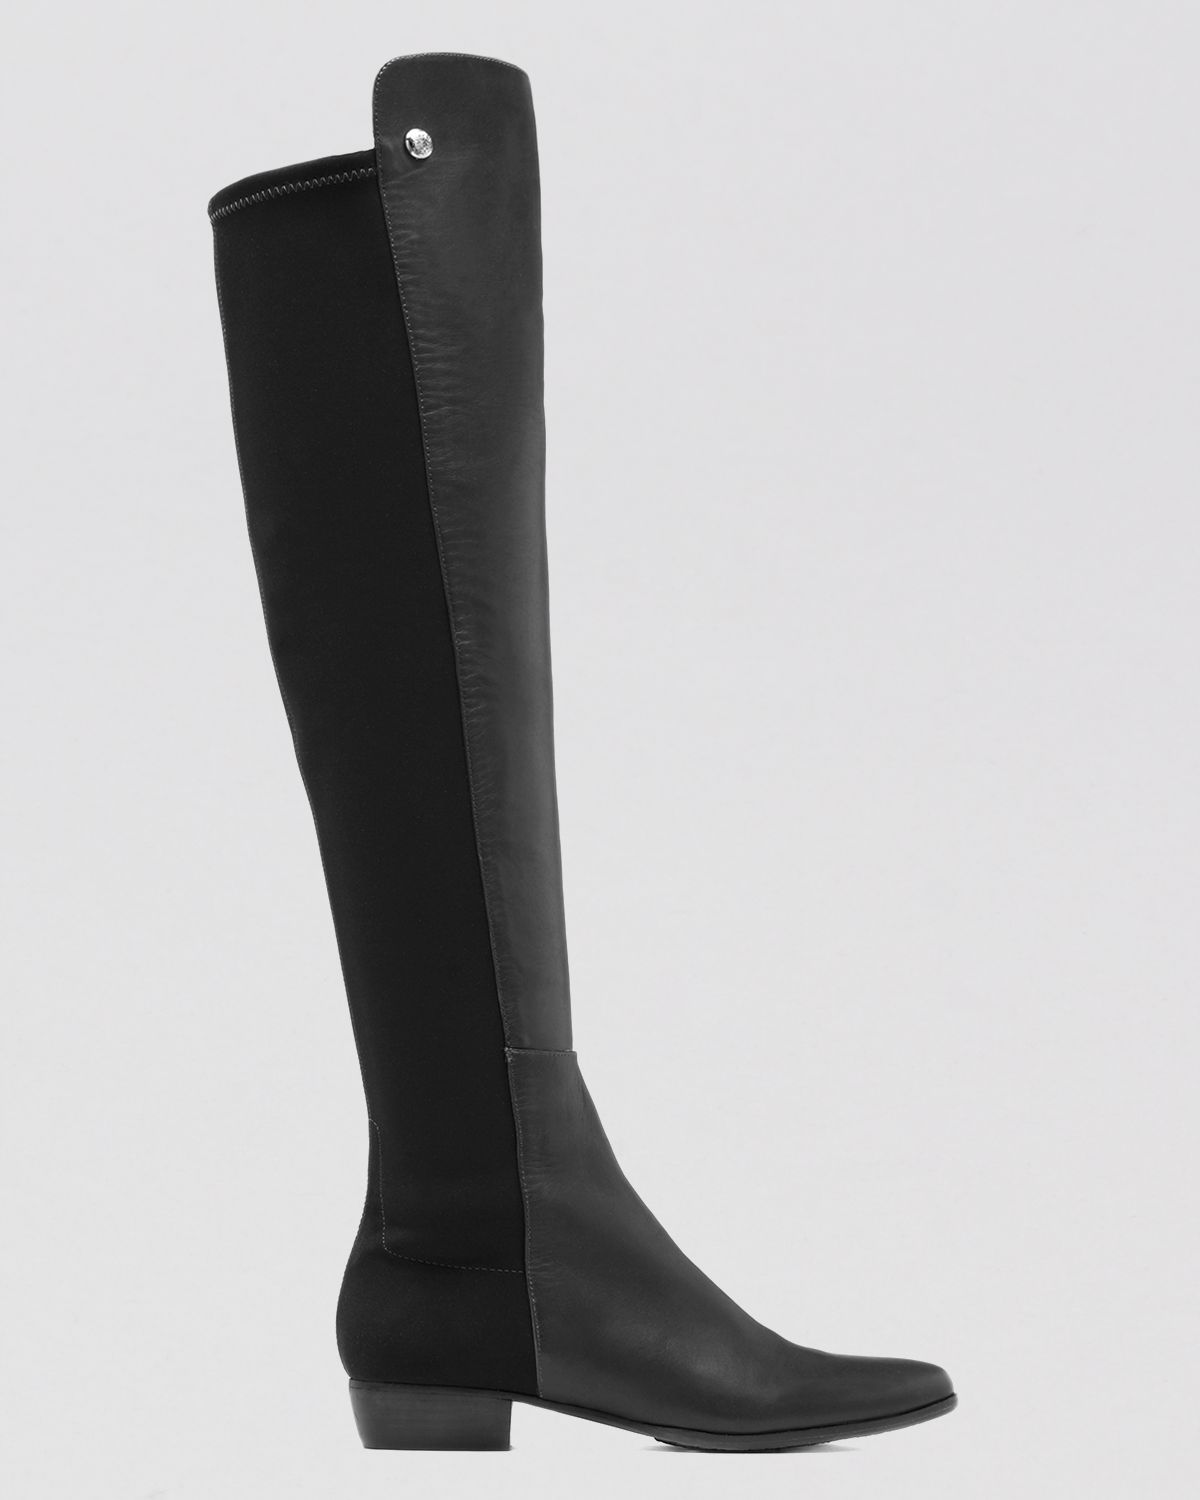 Vince Camuto Over The Knee Boots - Karita in Black - Lyst